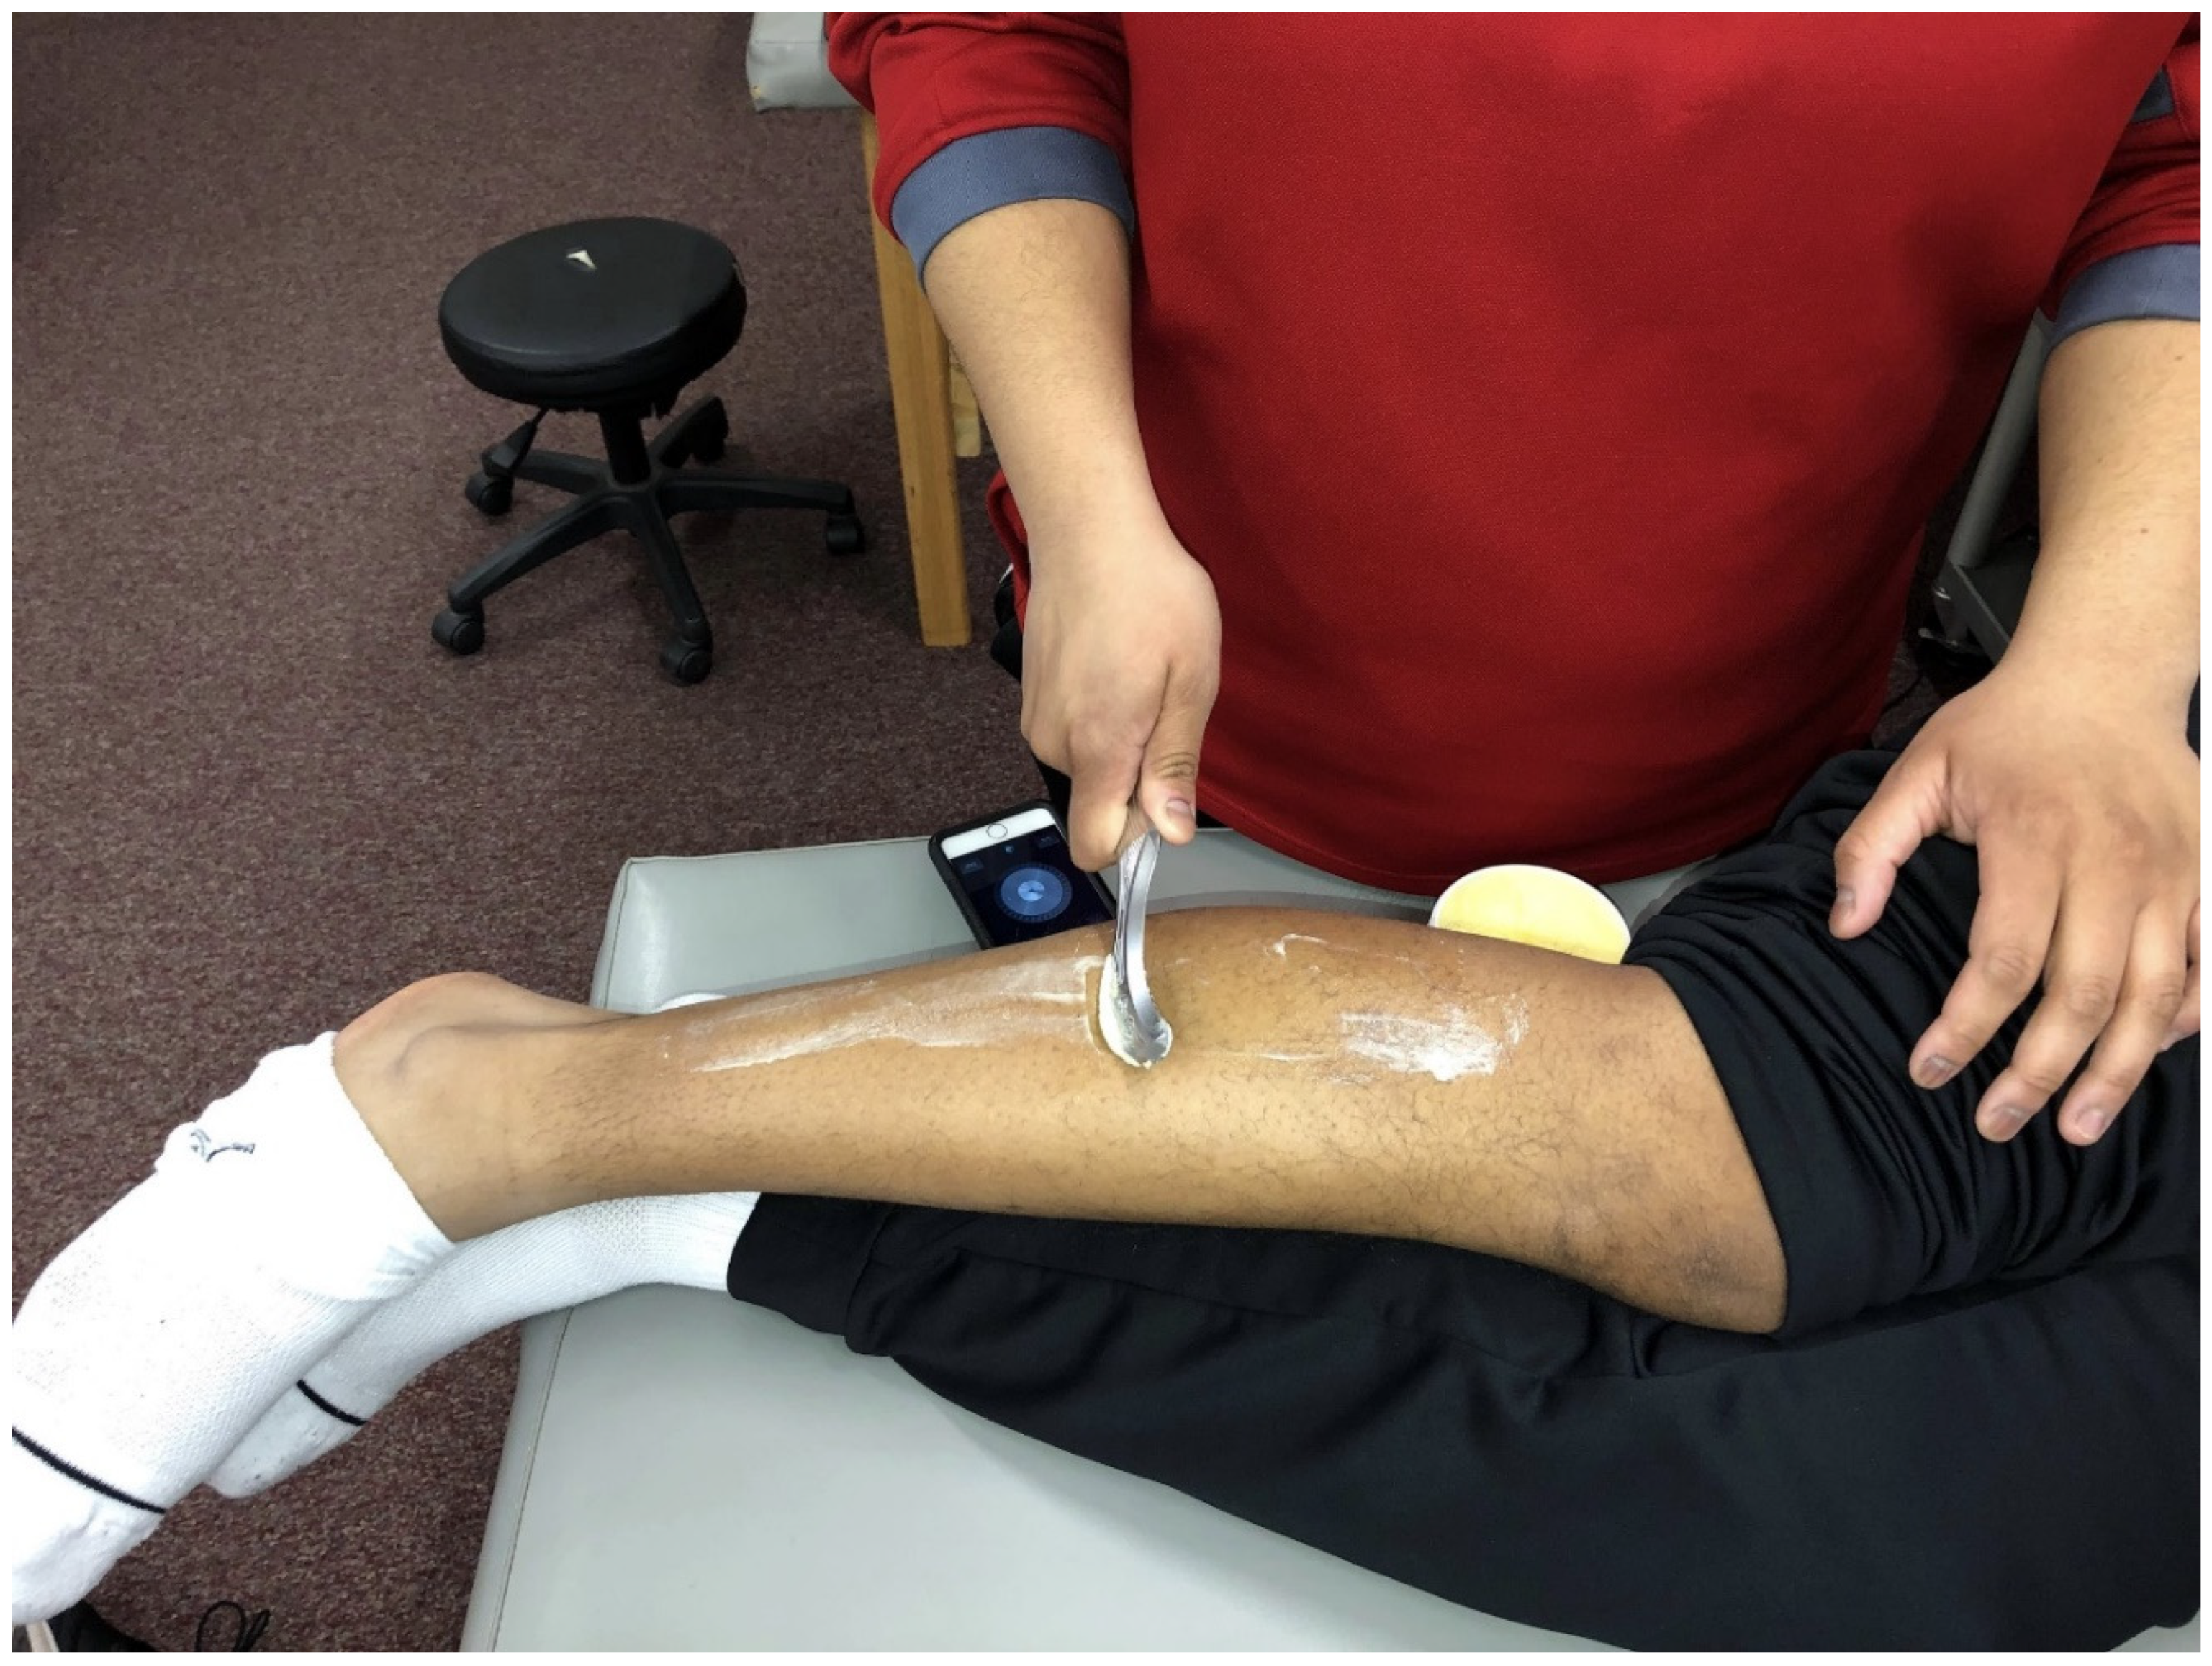 IASTM Treatment Protocol for an Inversion Ankle Sprain